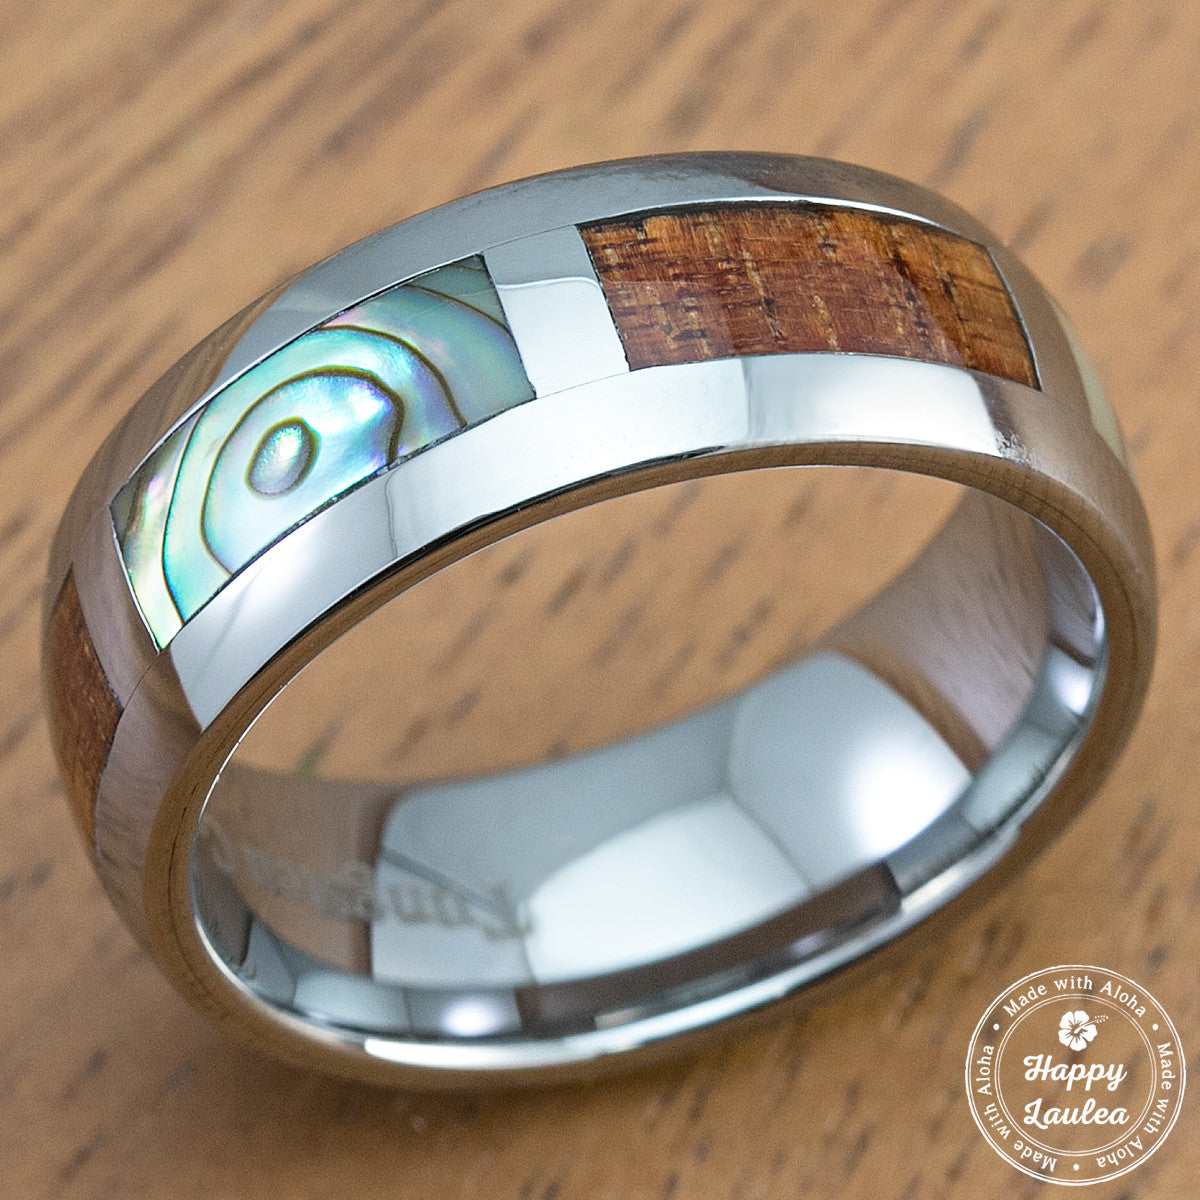 Tungsten Carbide Ring with Abalone Pau'a Shell & Koa Wood Block Inlay - 8mm, Dome Shape, Comfort Fitment